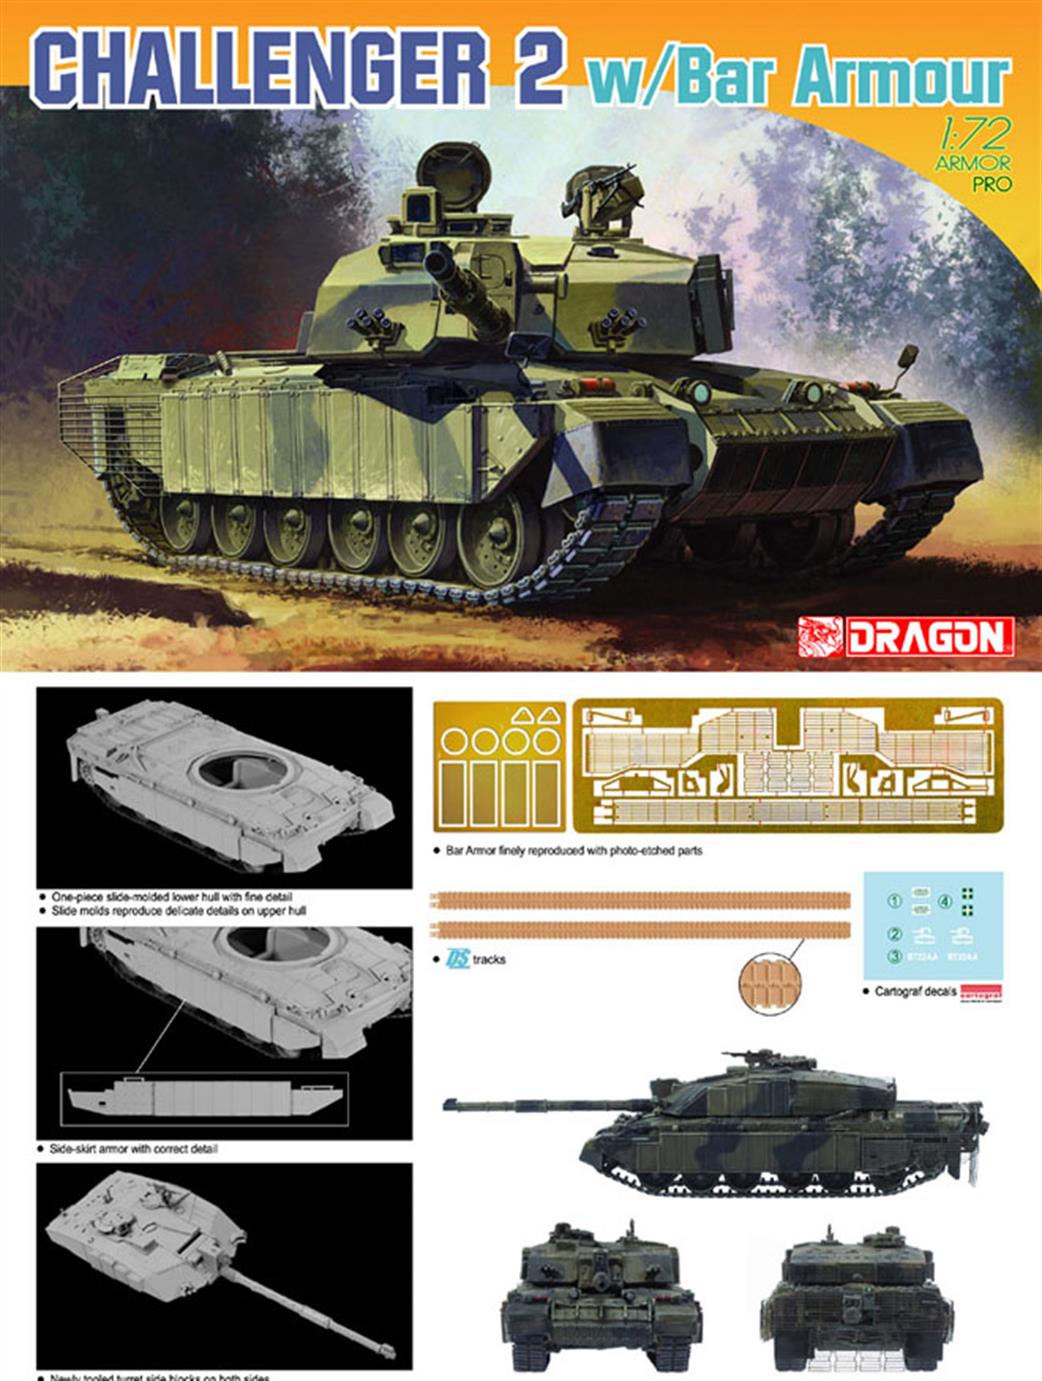 Dragon Models 1/72 7287 Challenger 2 with Bar Armour Tank Model